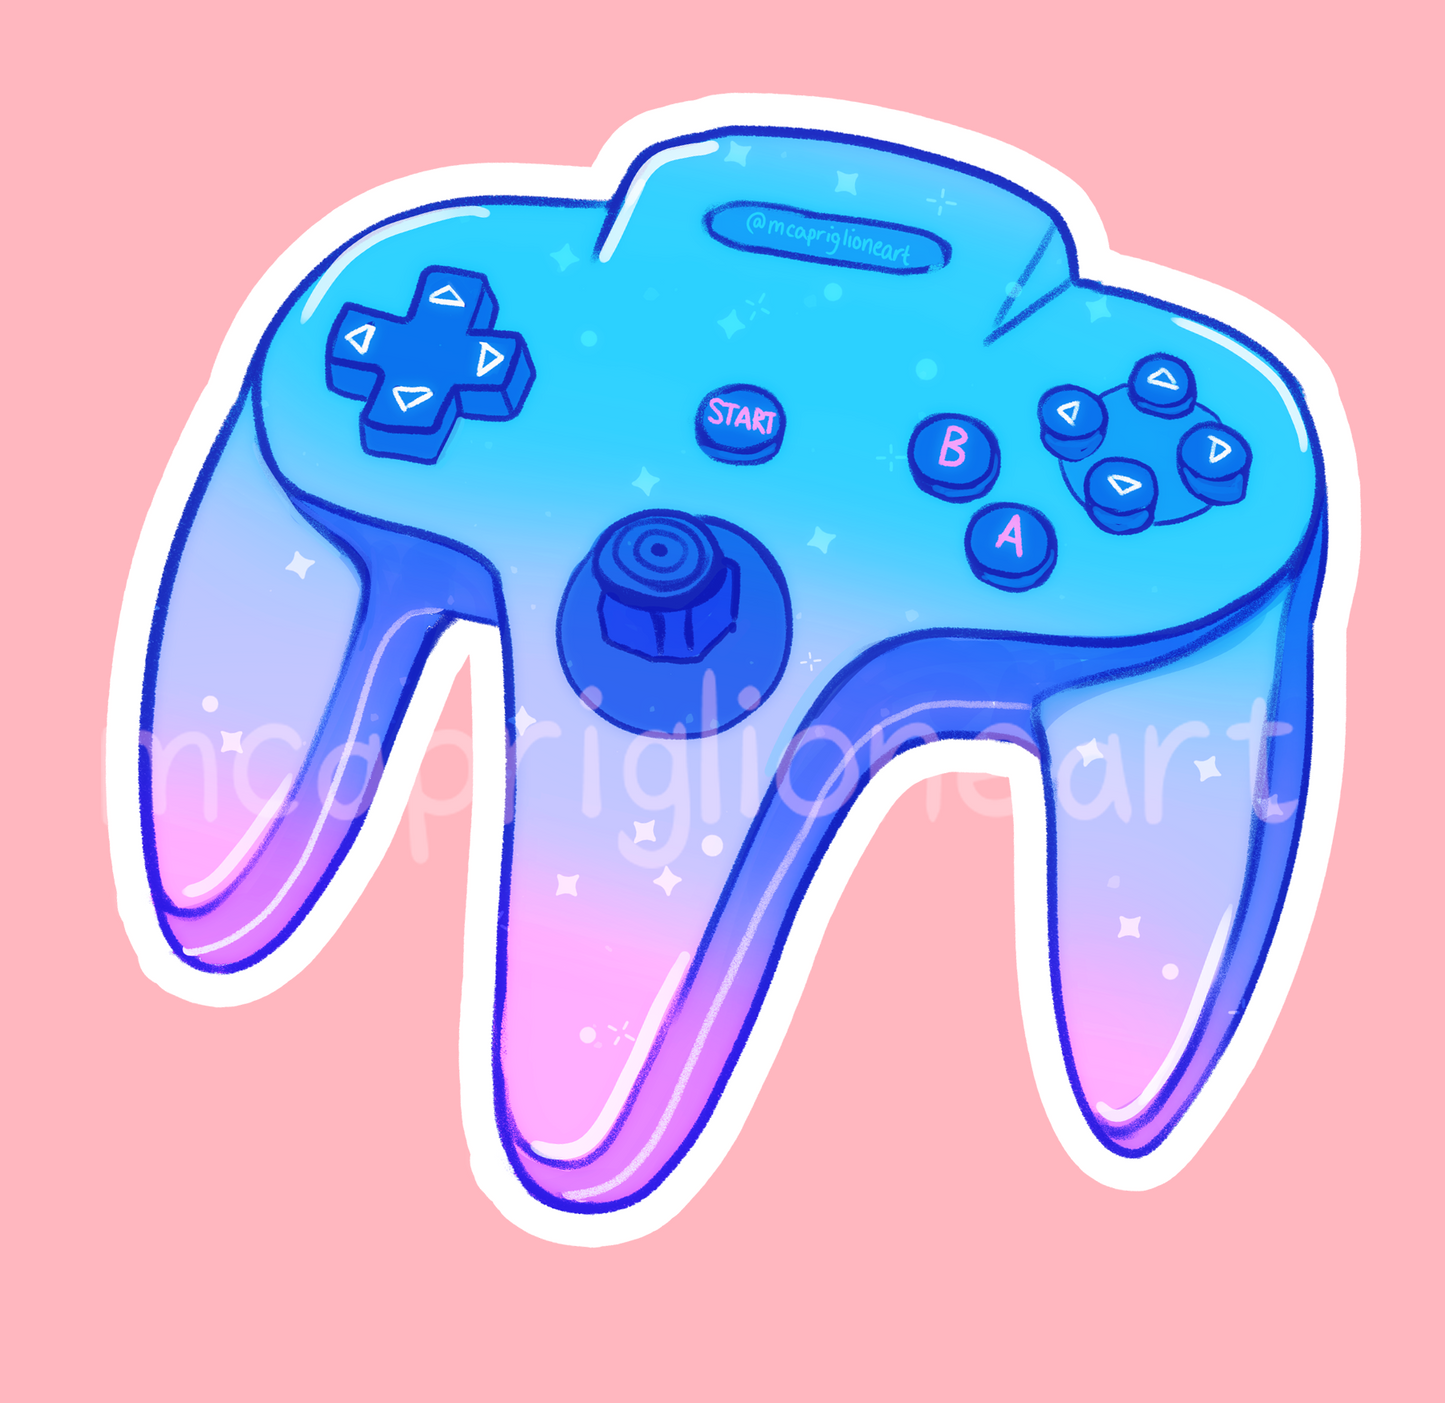 Vintage Game Controller Stickers